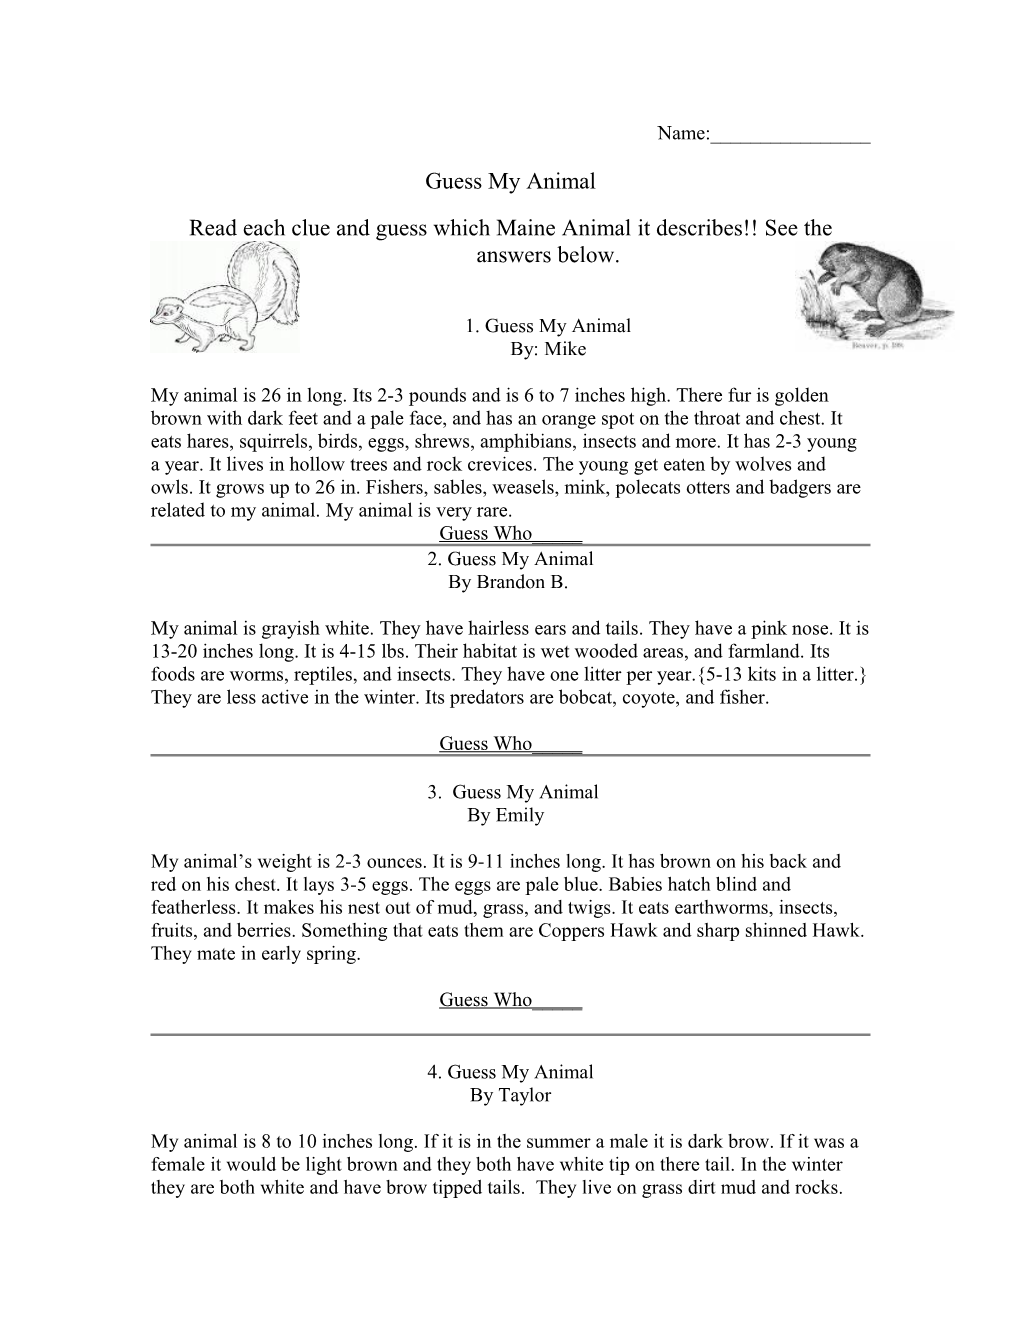 Read Each Clue and Guess Which Maine Animal It Describes See the Answers Below